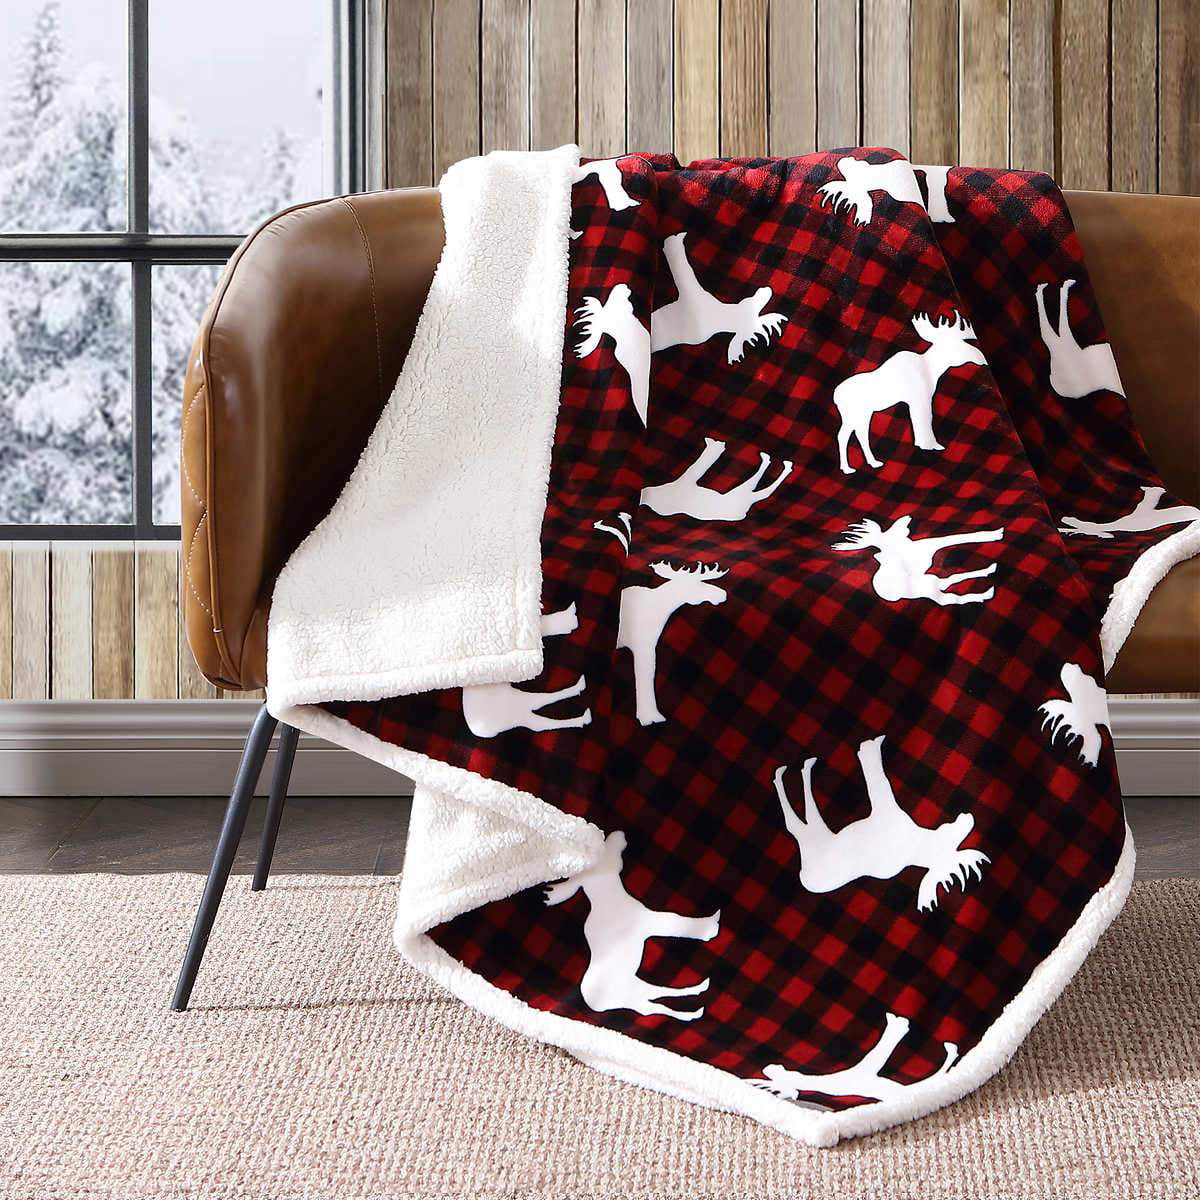 American Motorcycle Patch Flannel Fleece Blanket Ultra Soft Warmthrow Lightweight Microfleece Blanket for Home Sofa Bed 60X50 